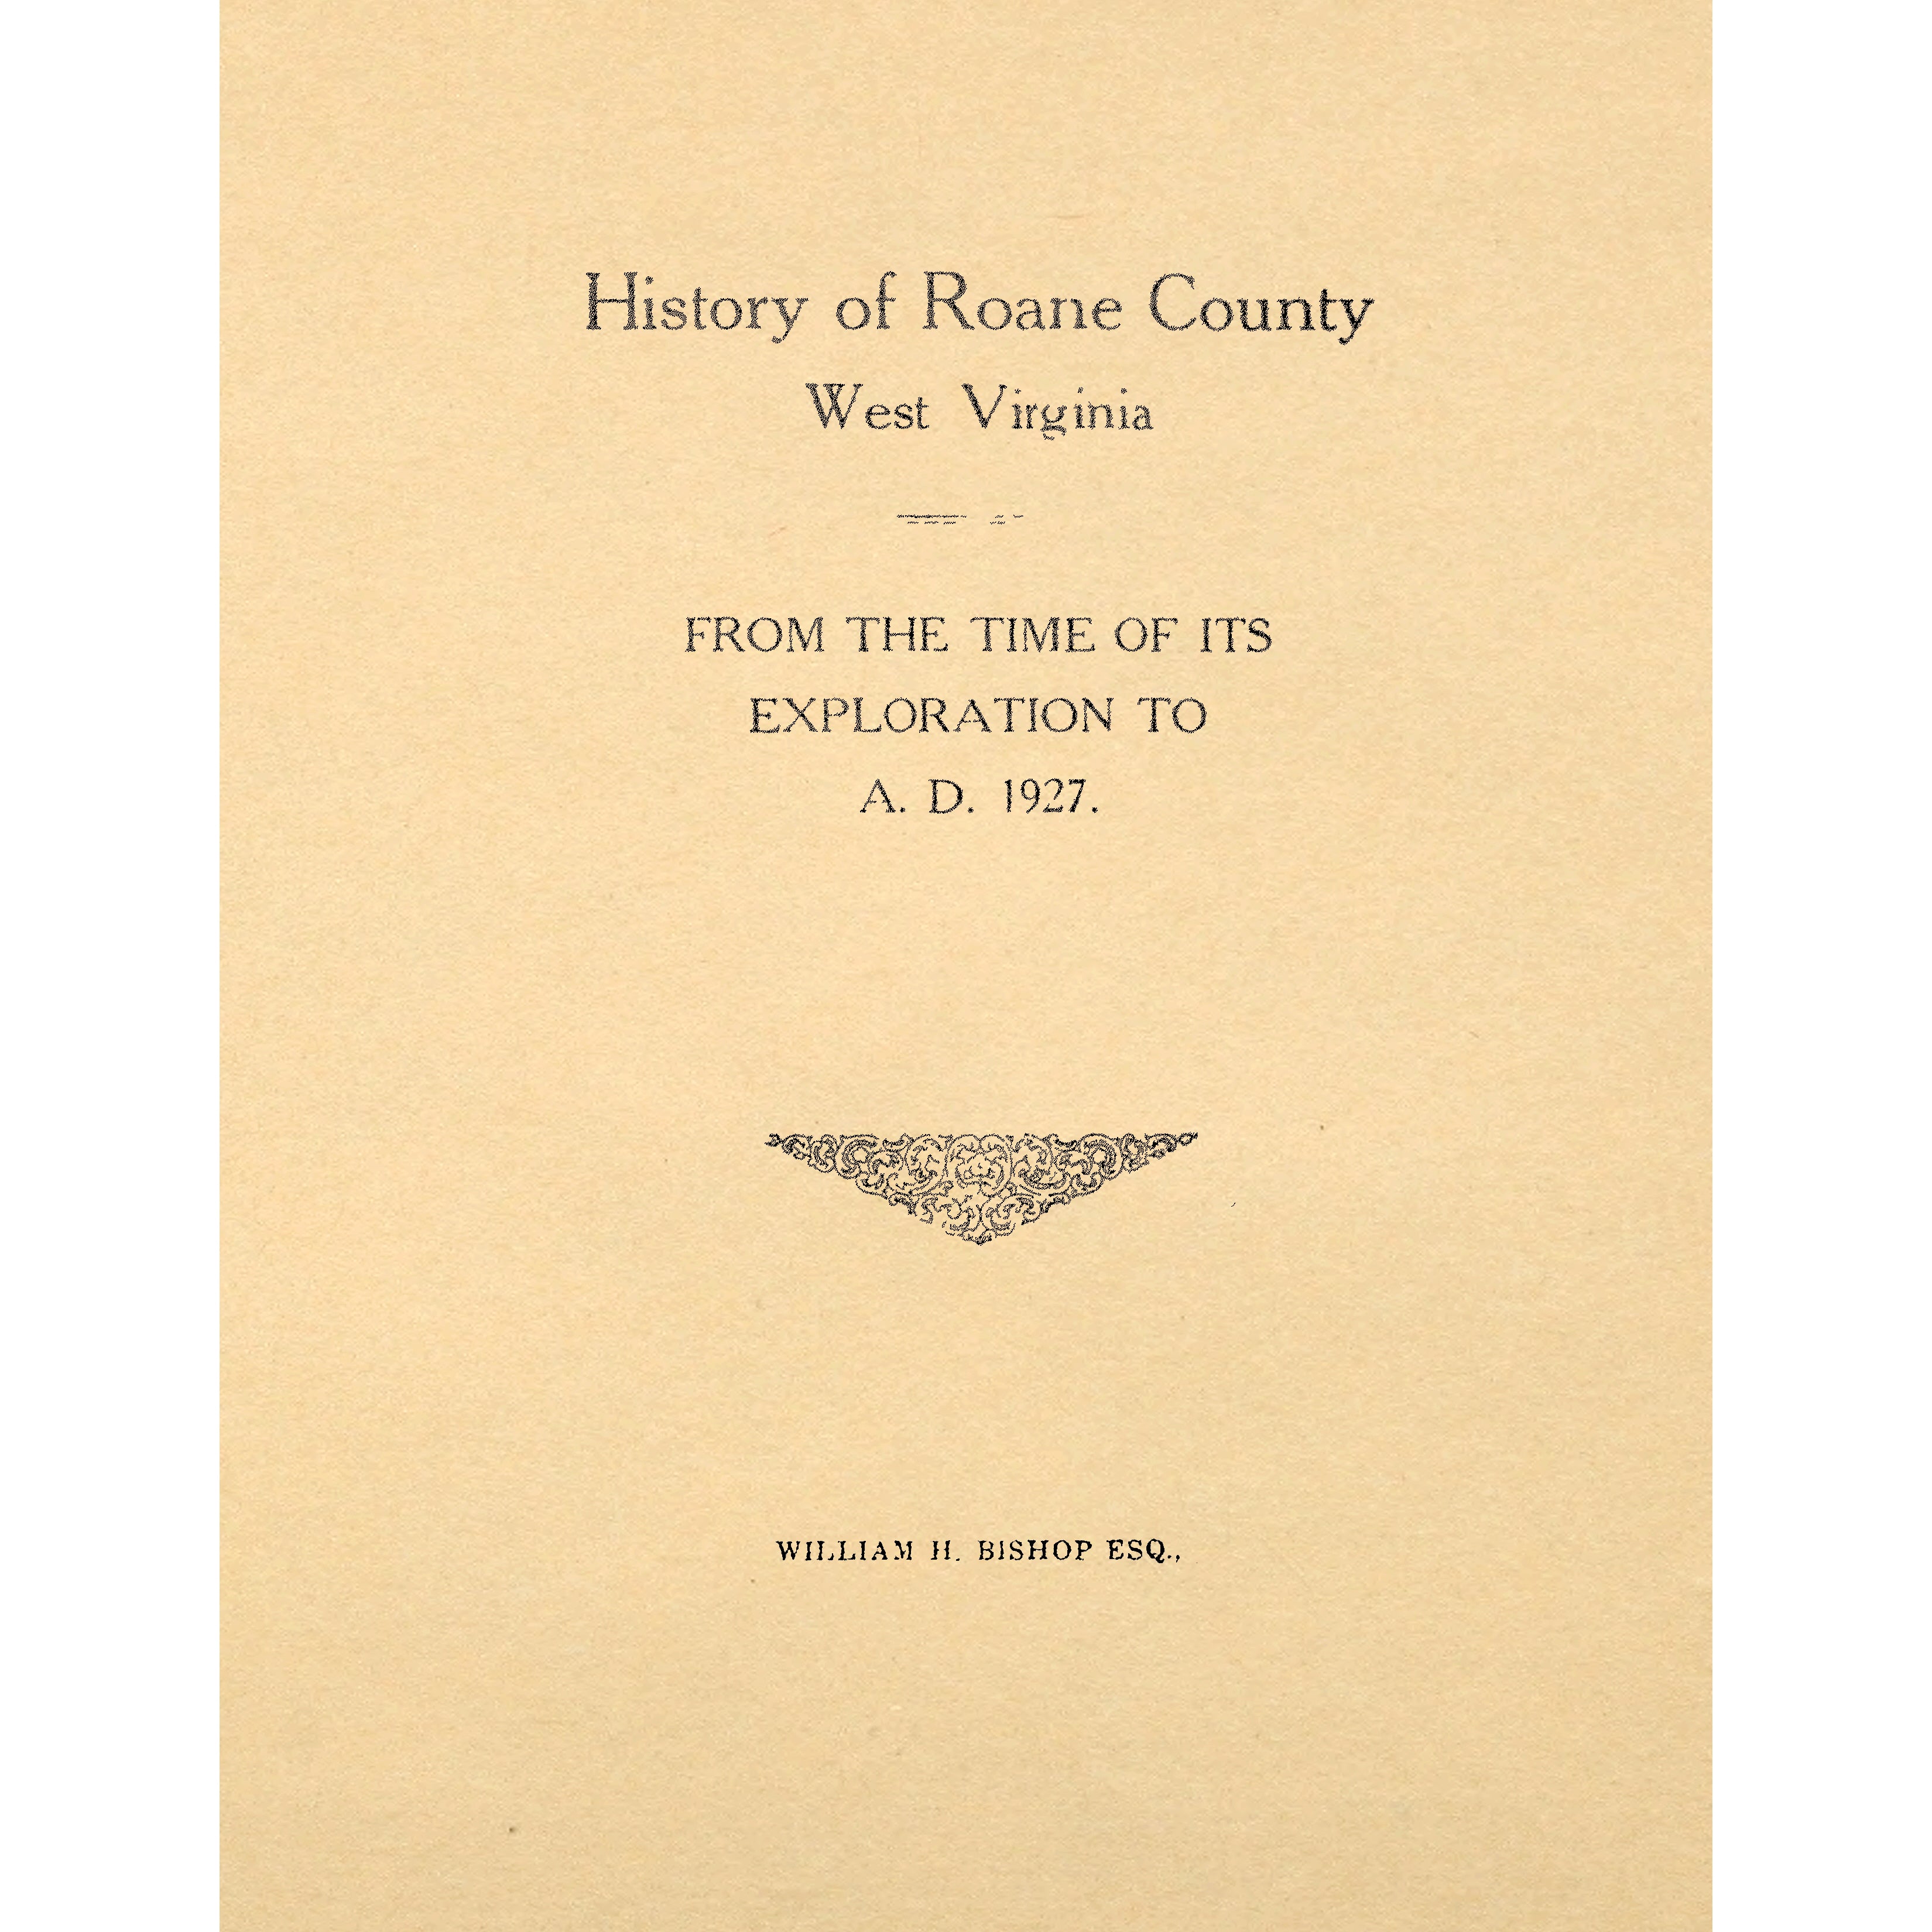 History of Roane County West Virginia